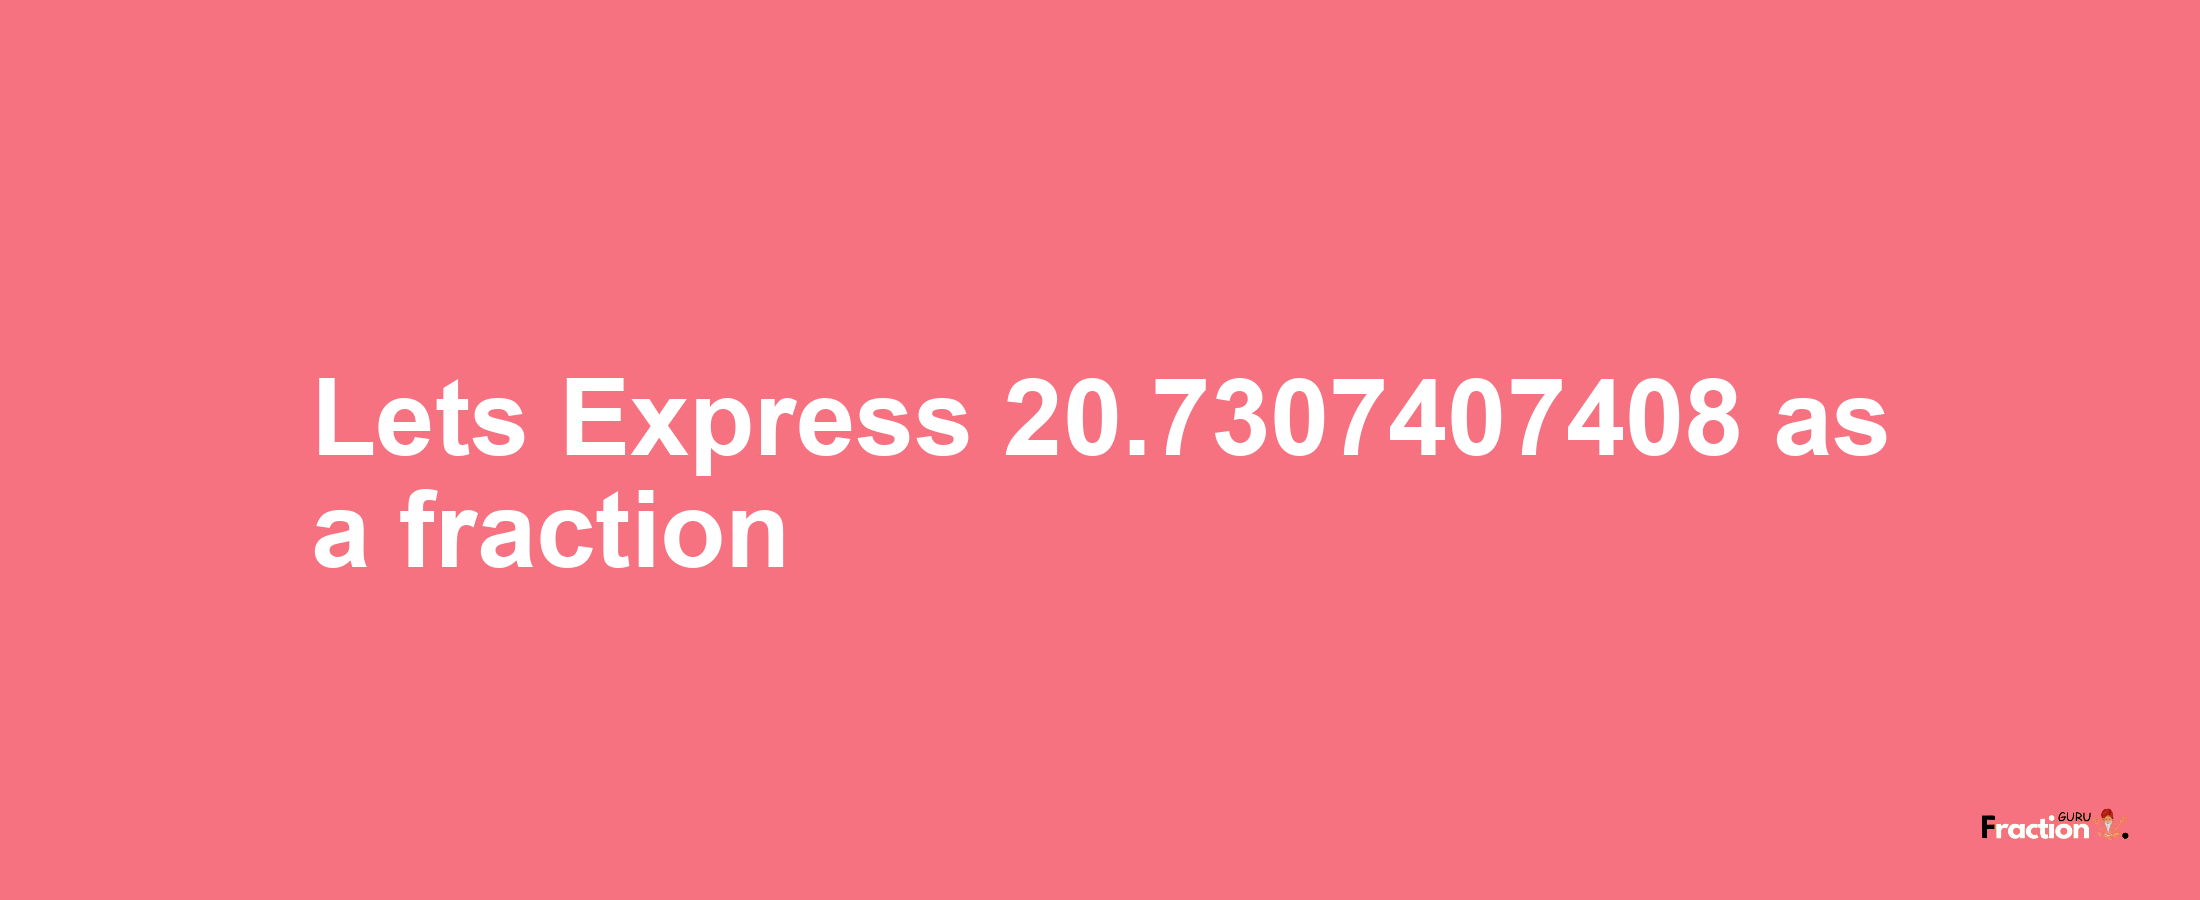 Lets Express 20.7307407408 as afraction